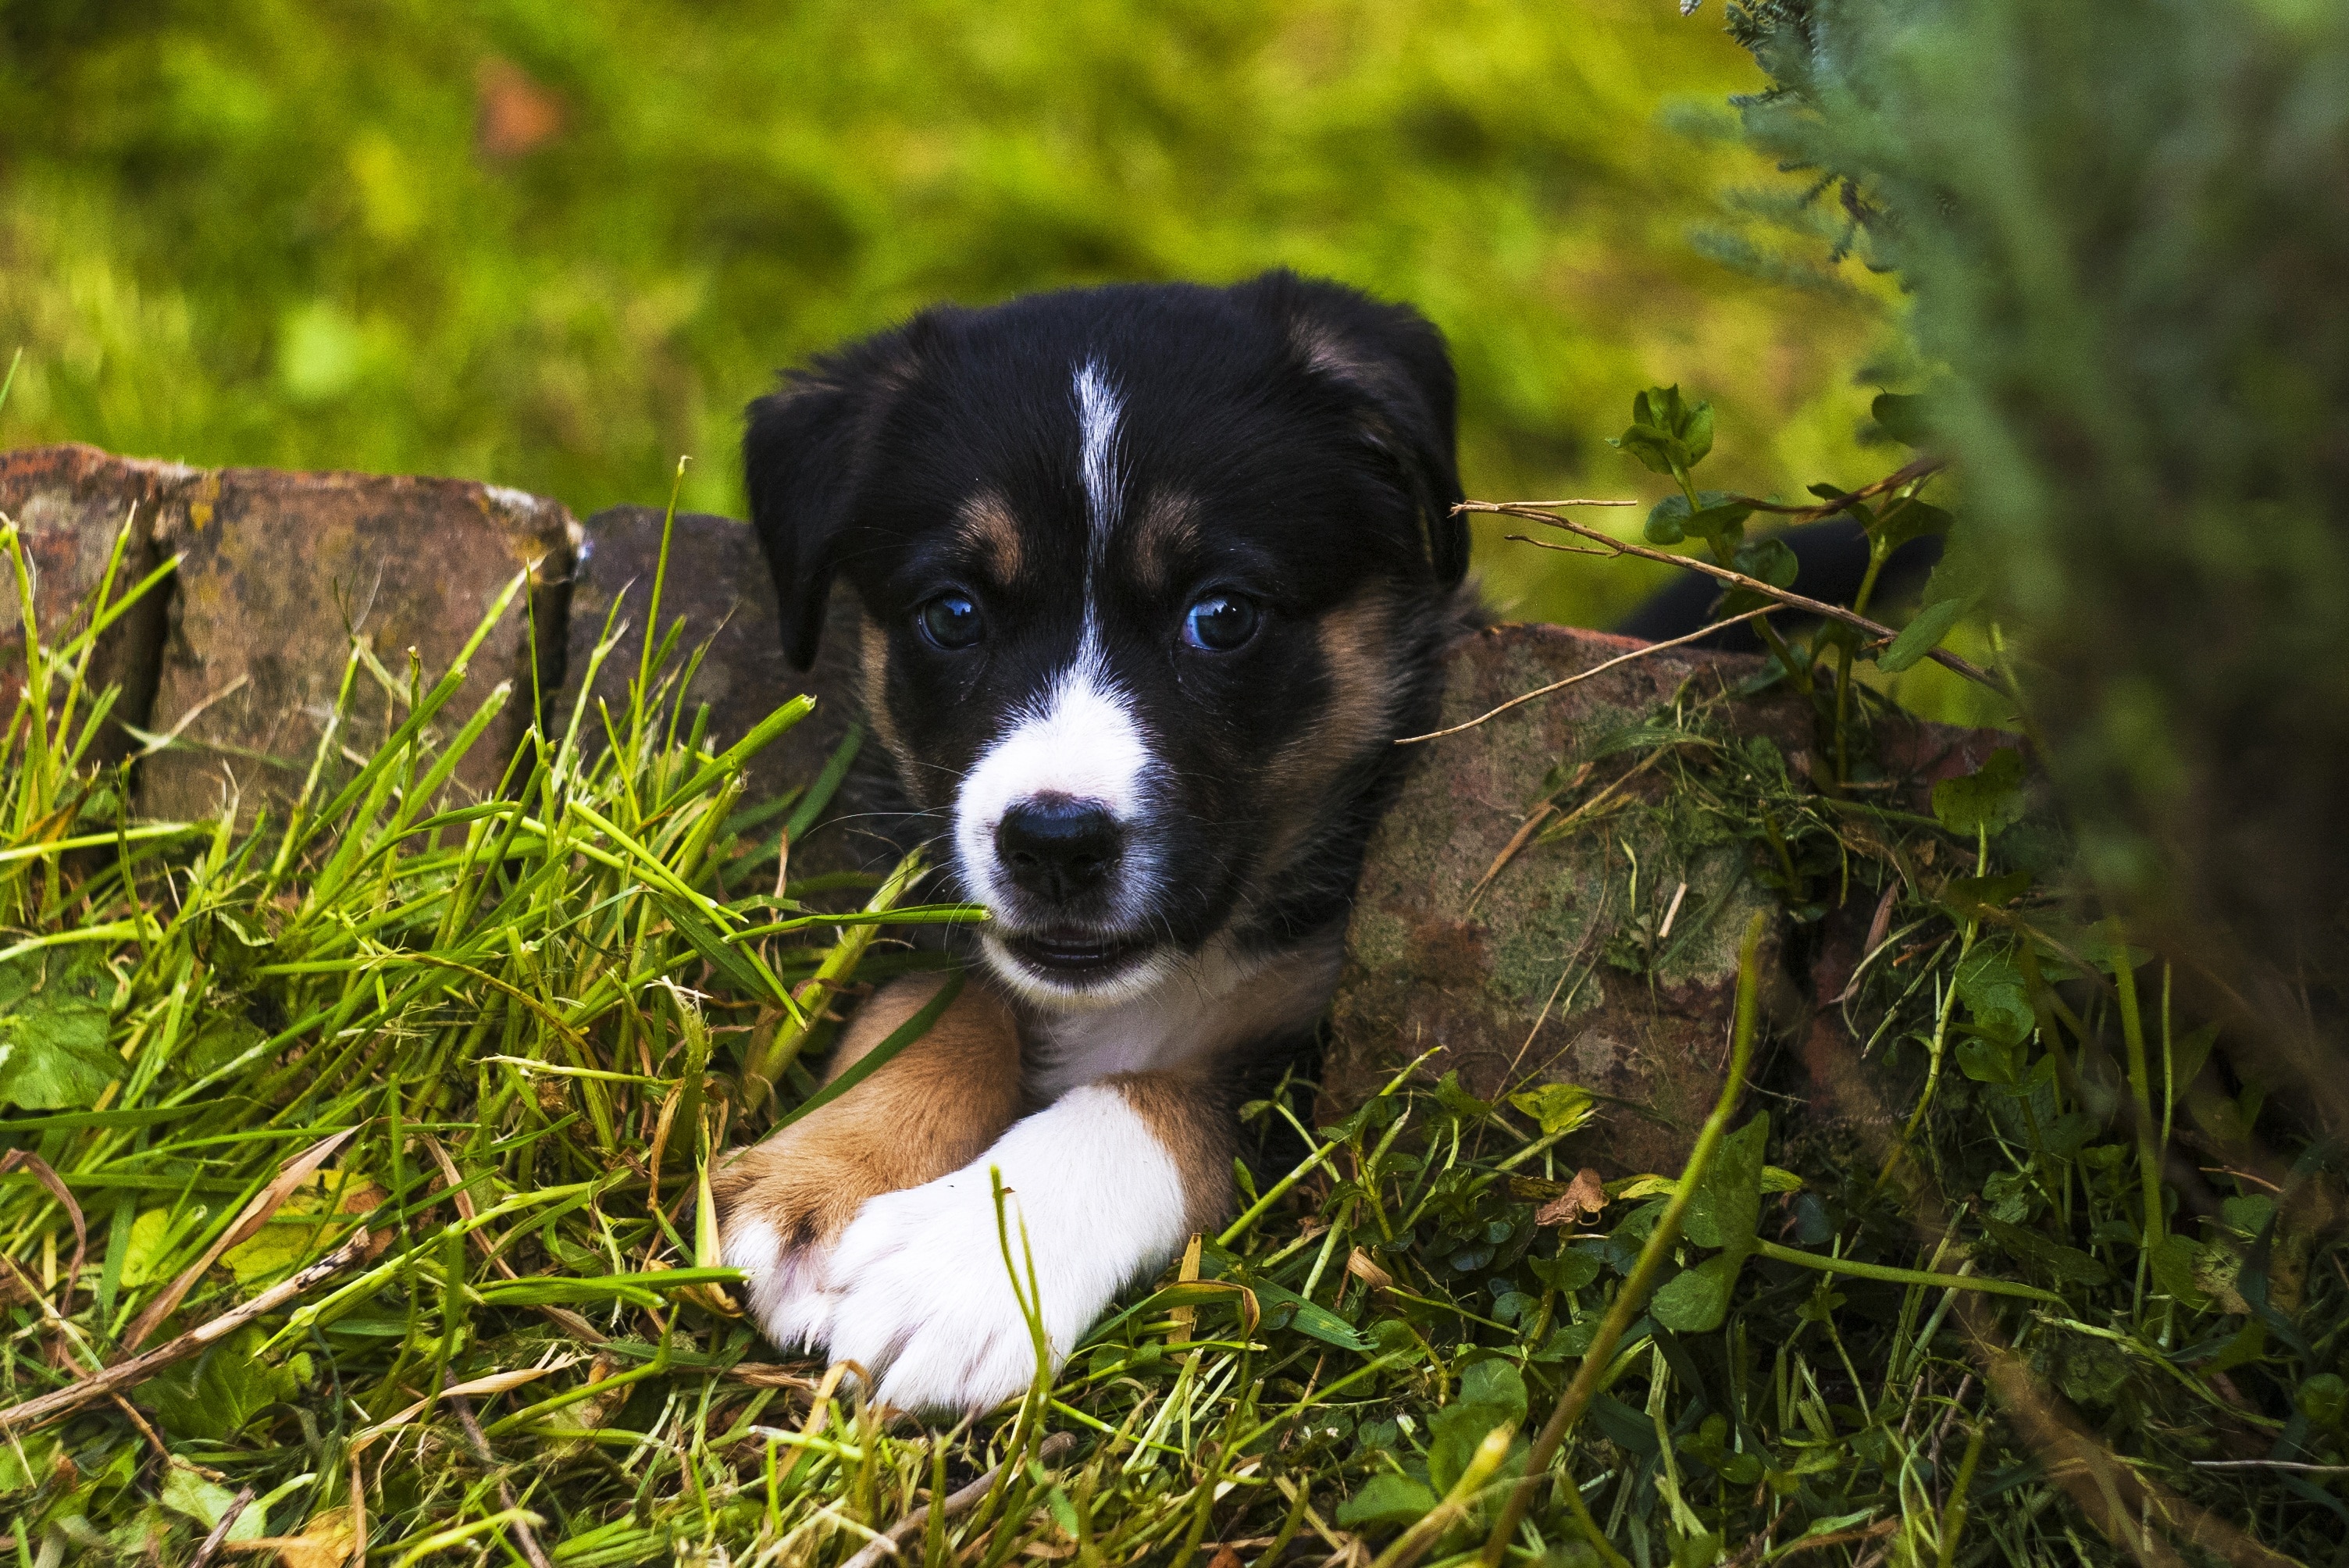 black, tan, and white short coated puppy on green grass